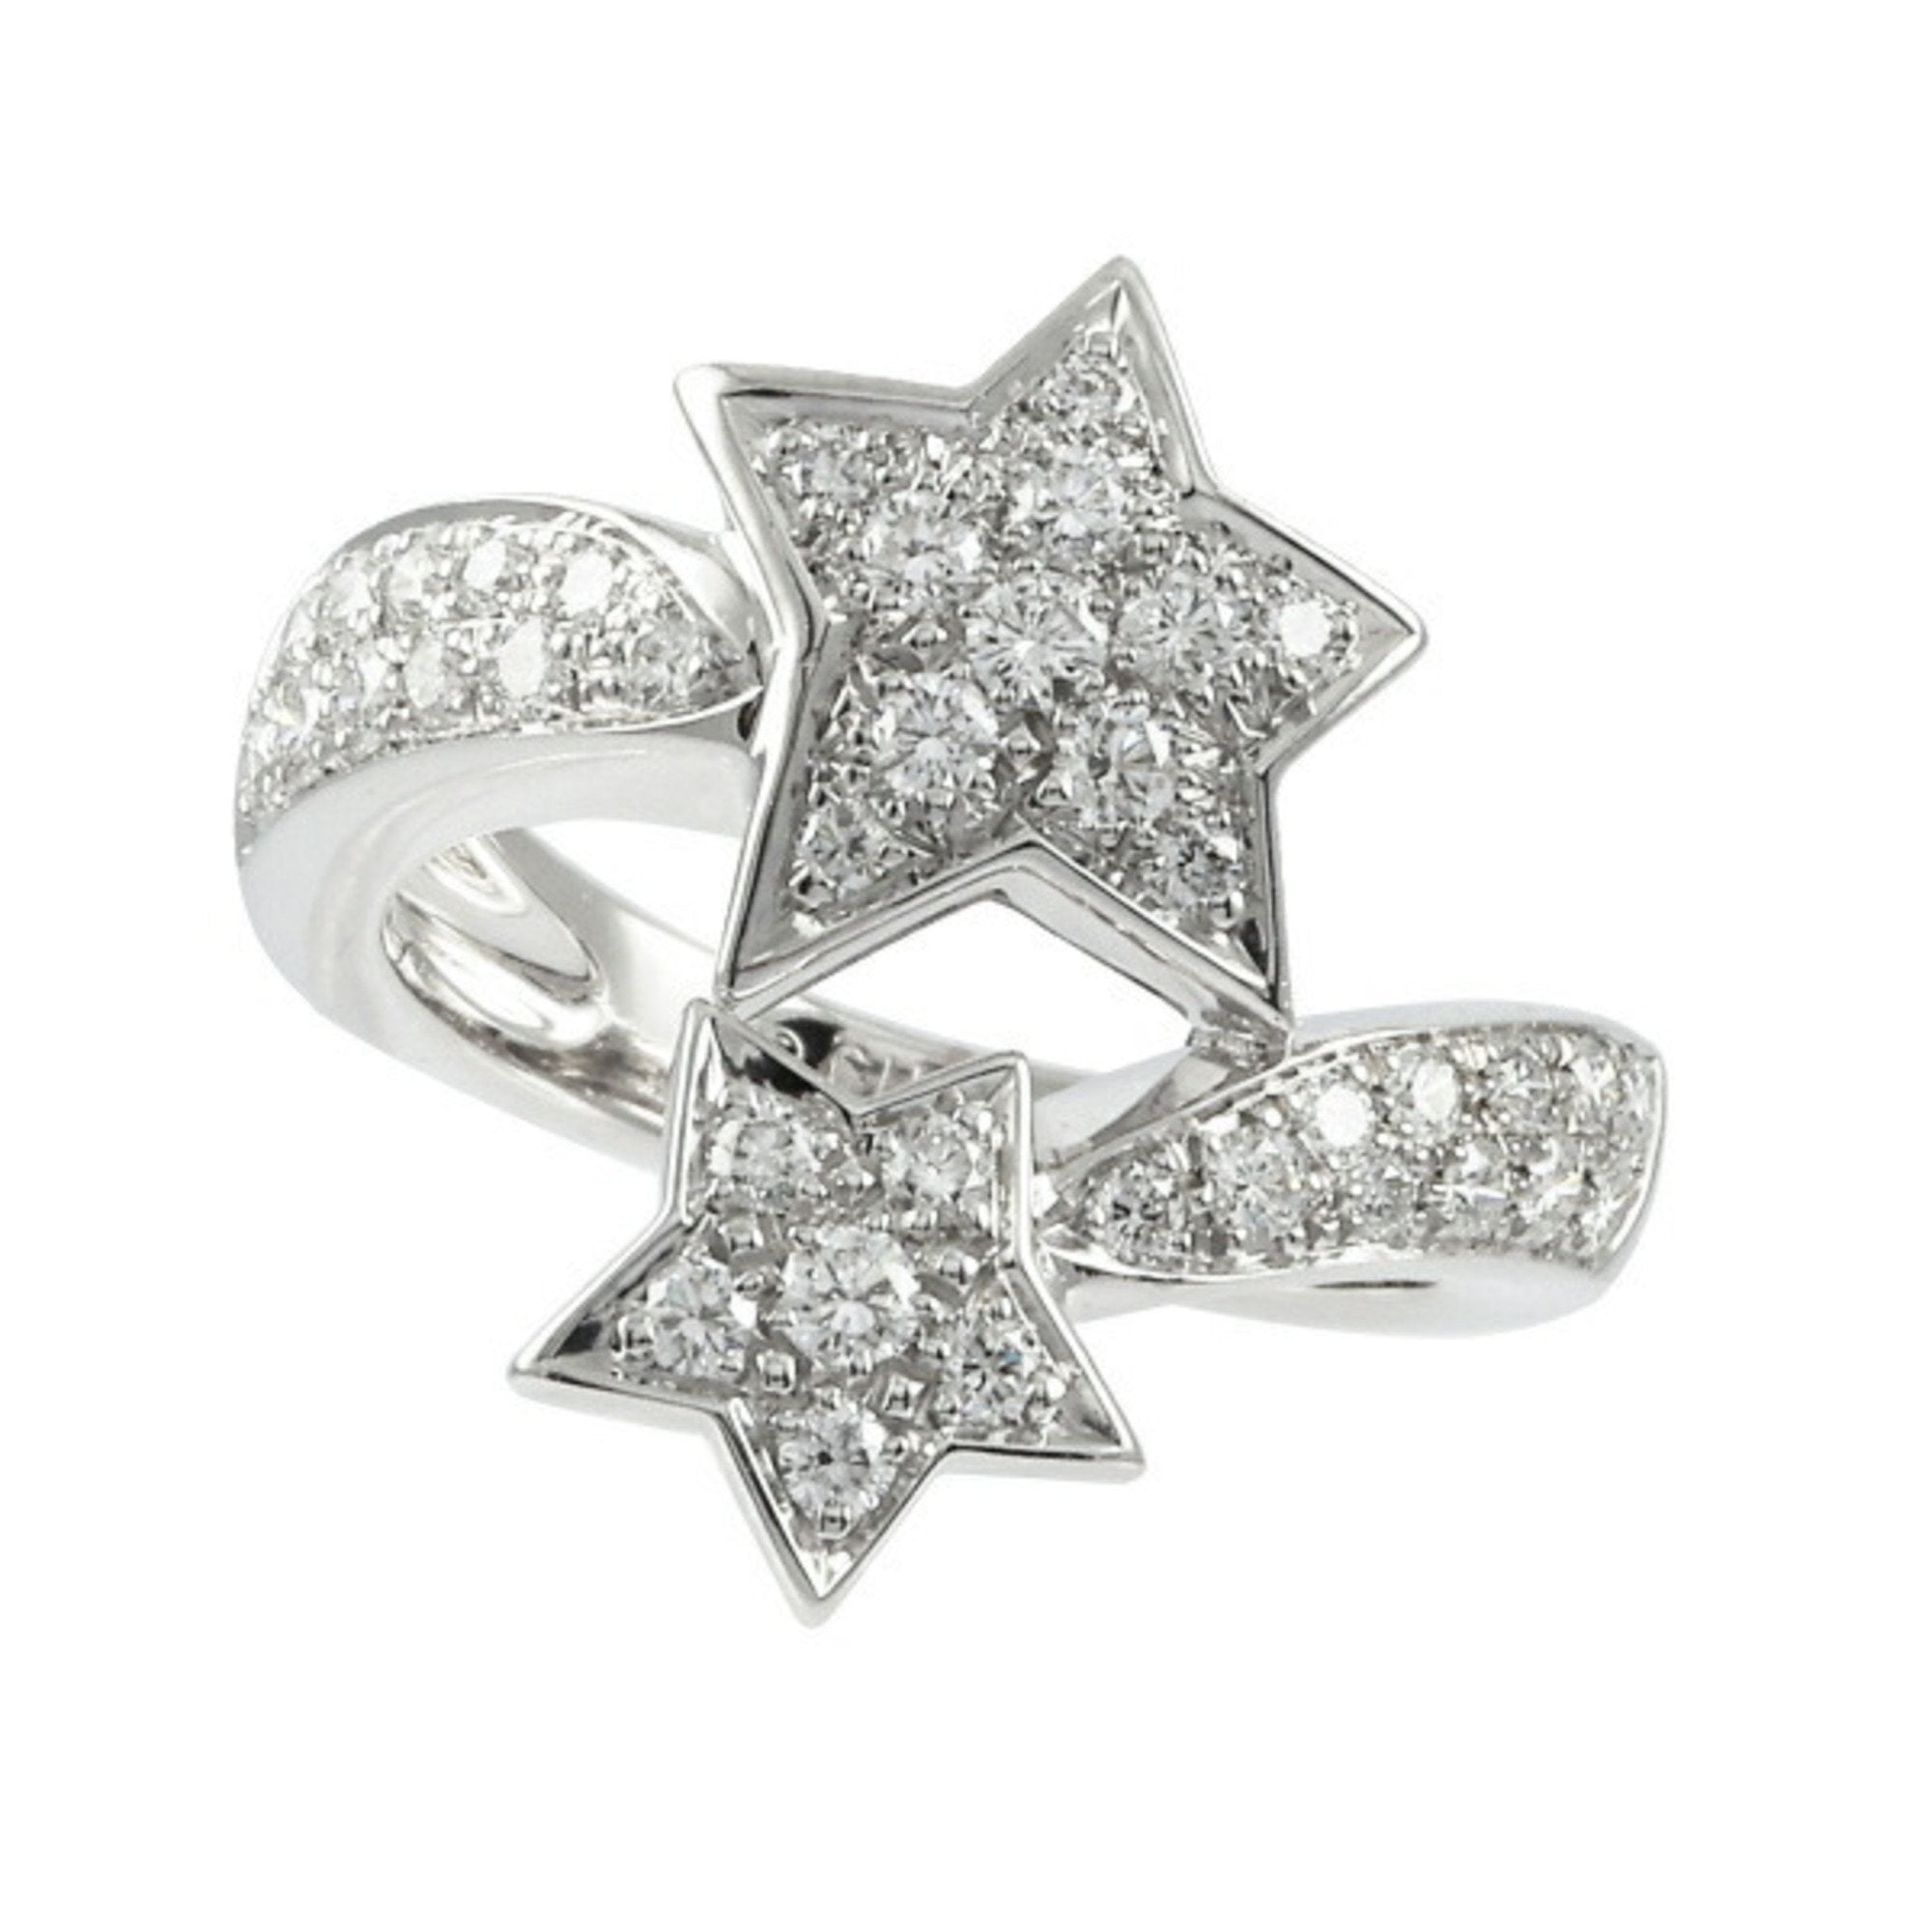 CHANEL Comet Collection Star K18WG White Gold Ring